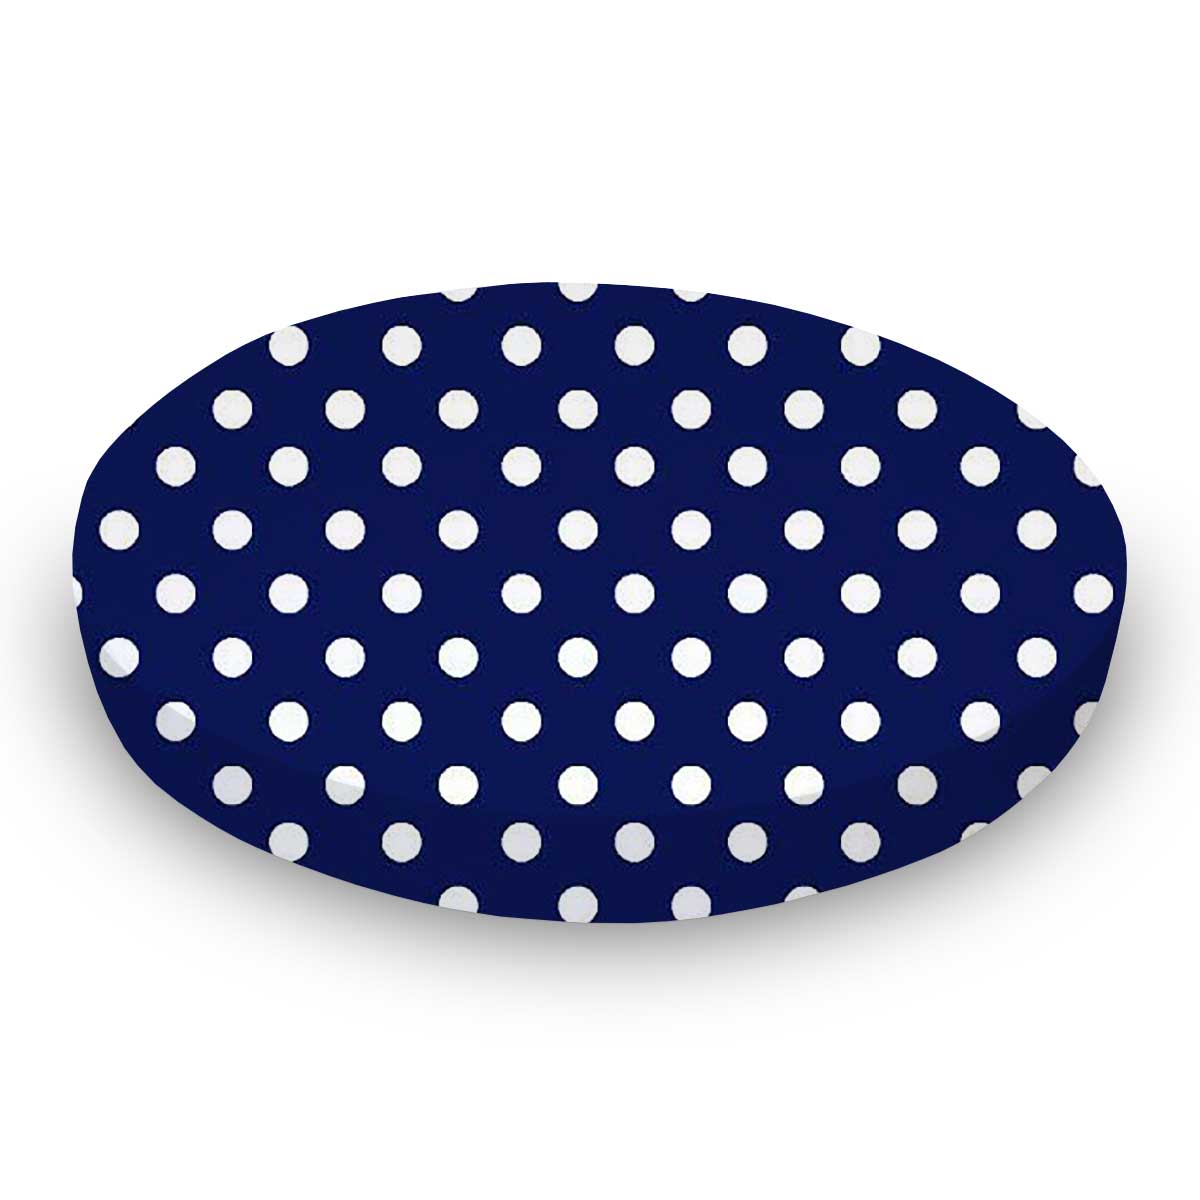 Oval Crib (Stokke Sleepi) - Primary Polka Dots Navy Woven - Fitted  Oval